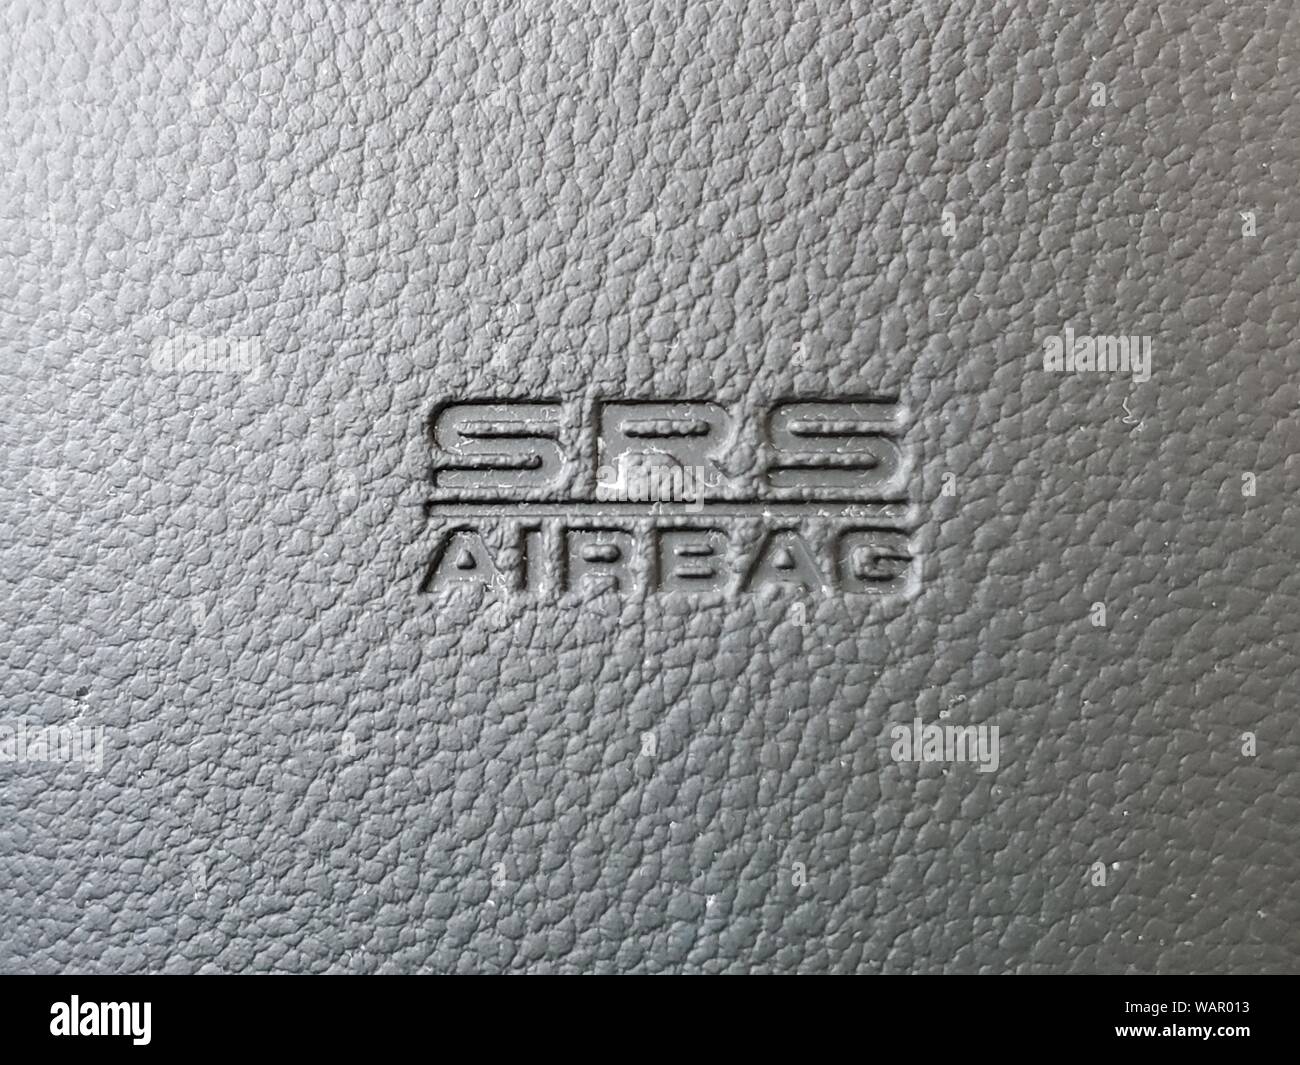 Close-up of logo for SRS Airbag or Supplemental Restraint System airbag, on car dashboard, August 21, 2019. () Stock Photo